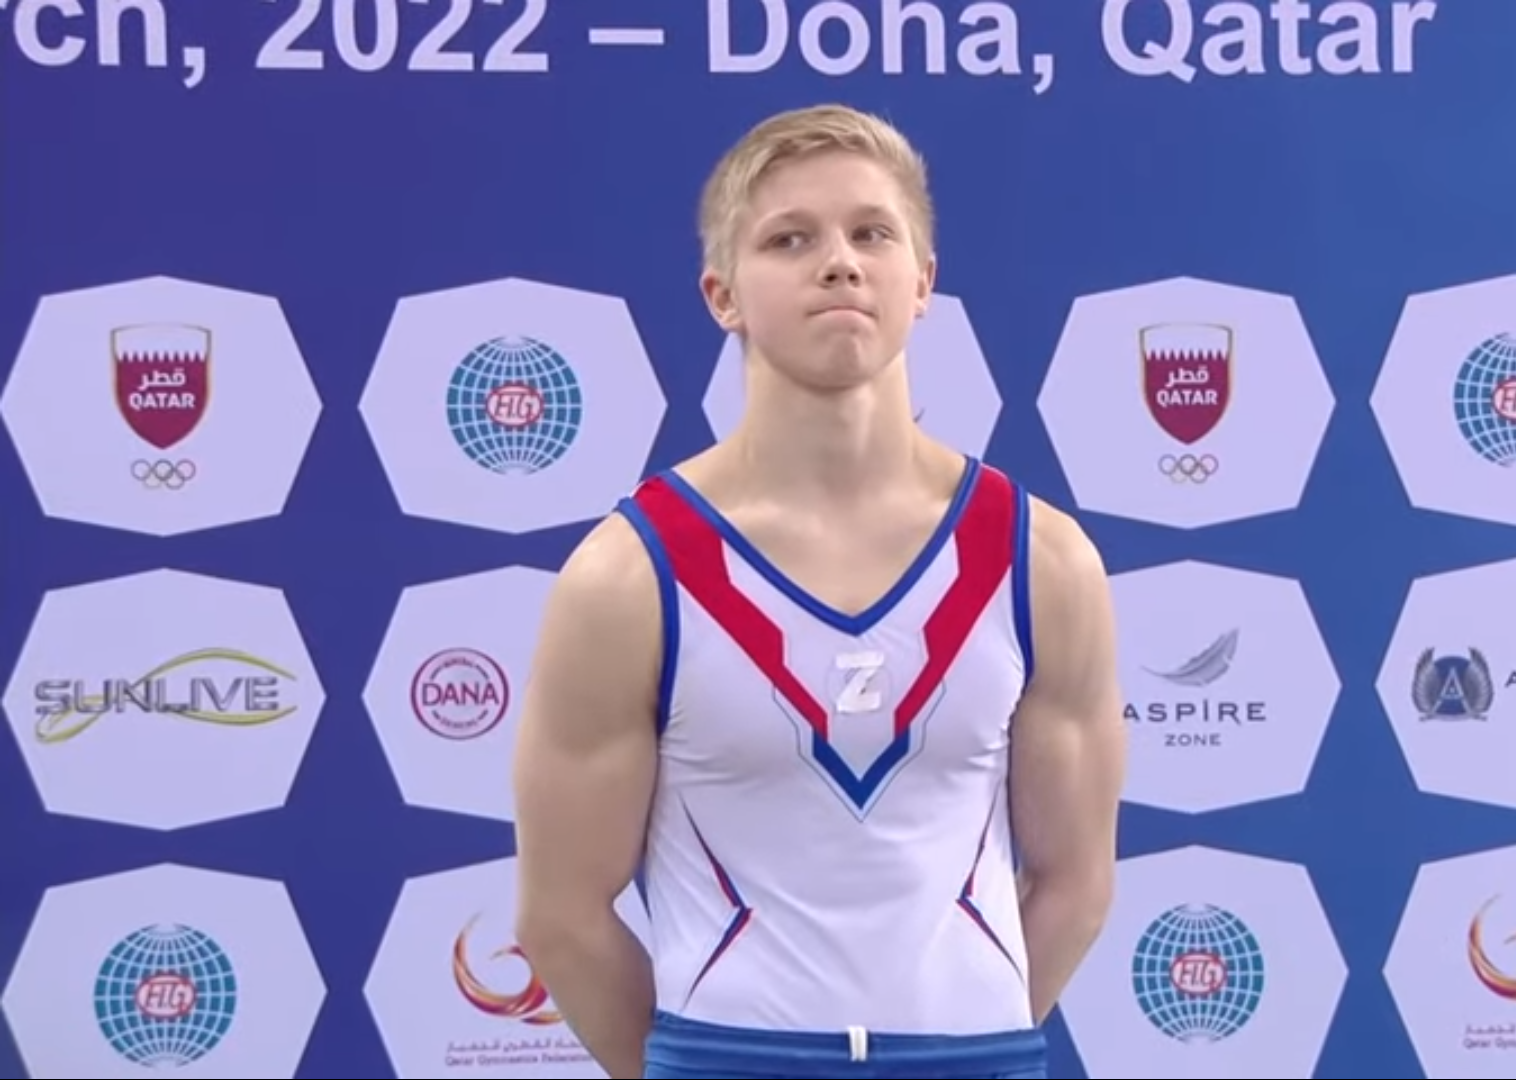 Kuliak is serving a one-year ban after sporting a Z symbol on the podium during a FIG Apparatus World Cup event in Doha in March ©YouTube